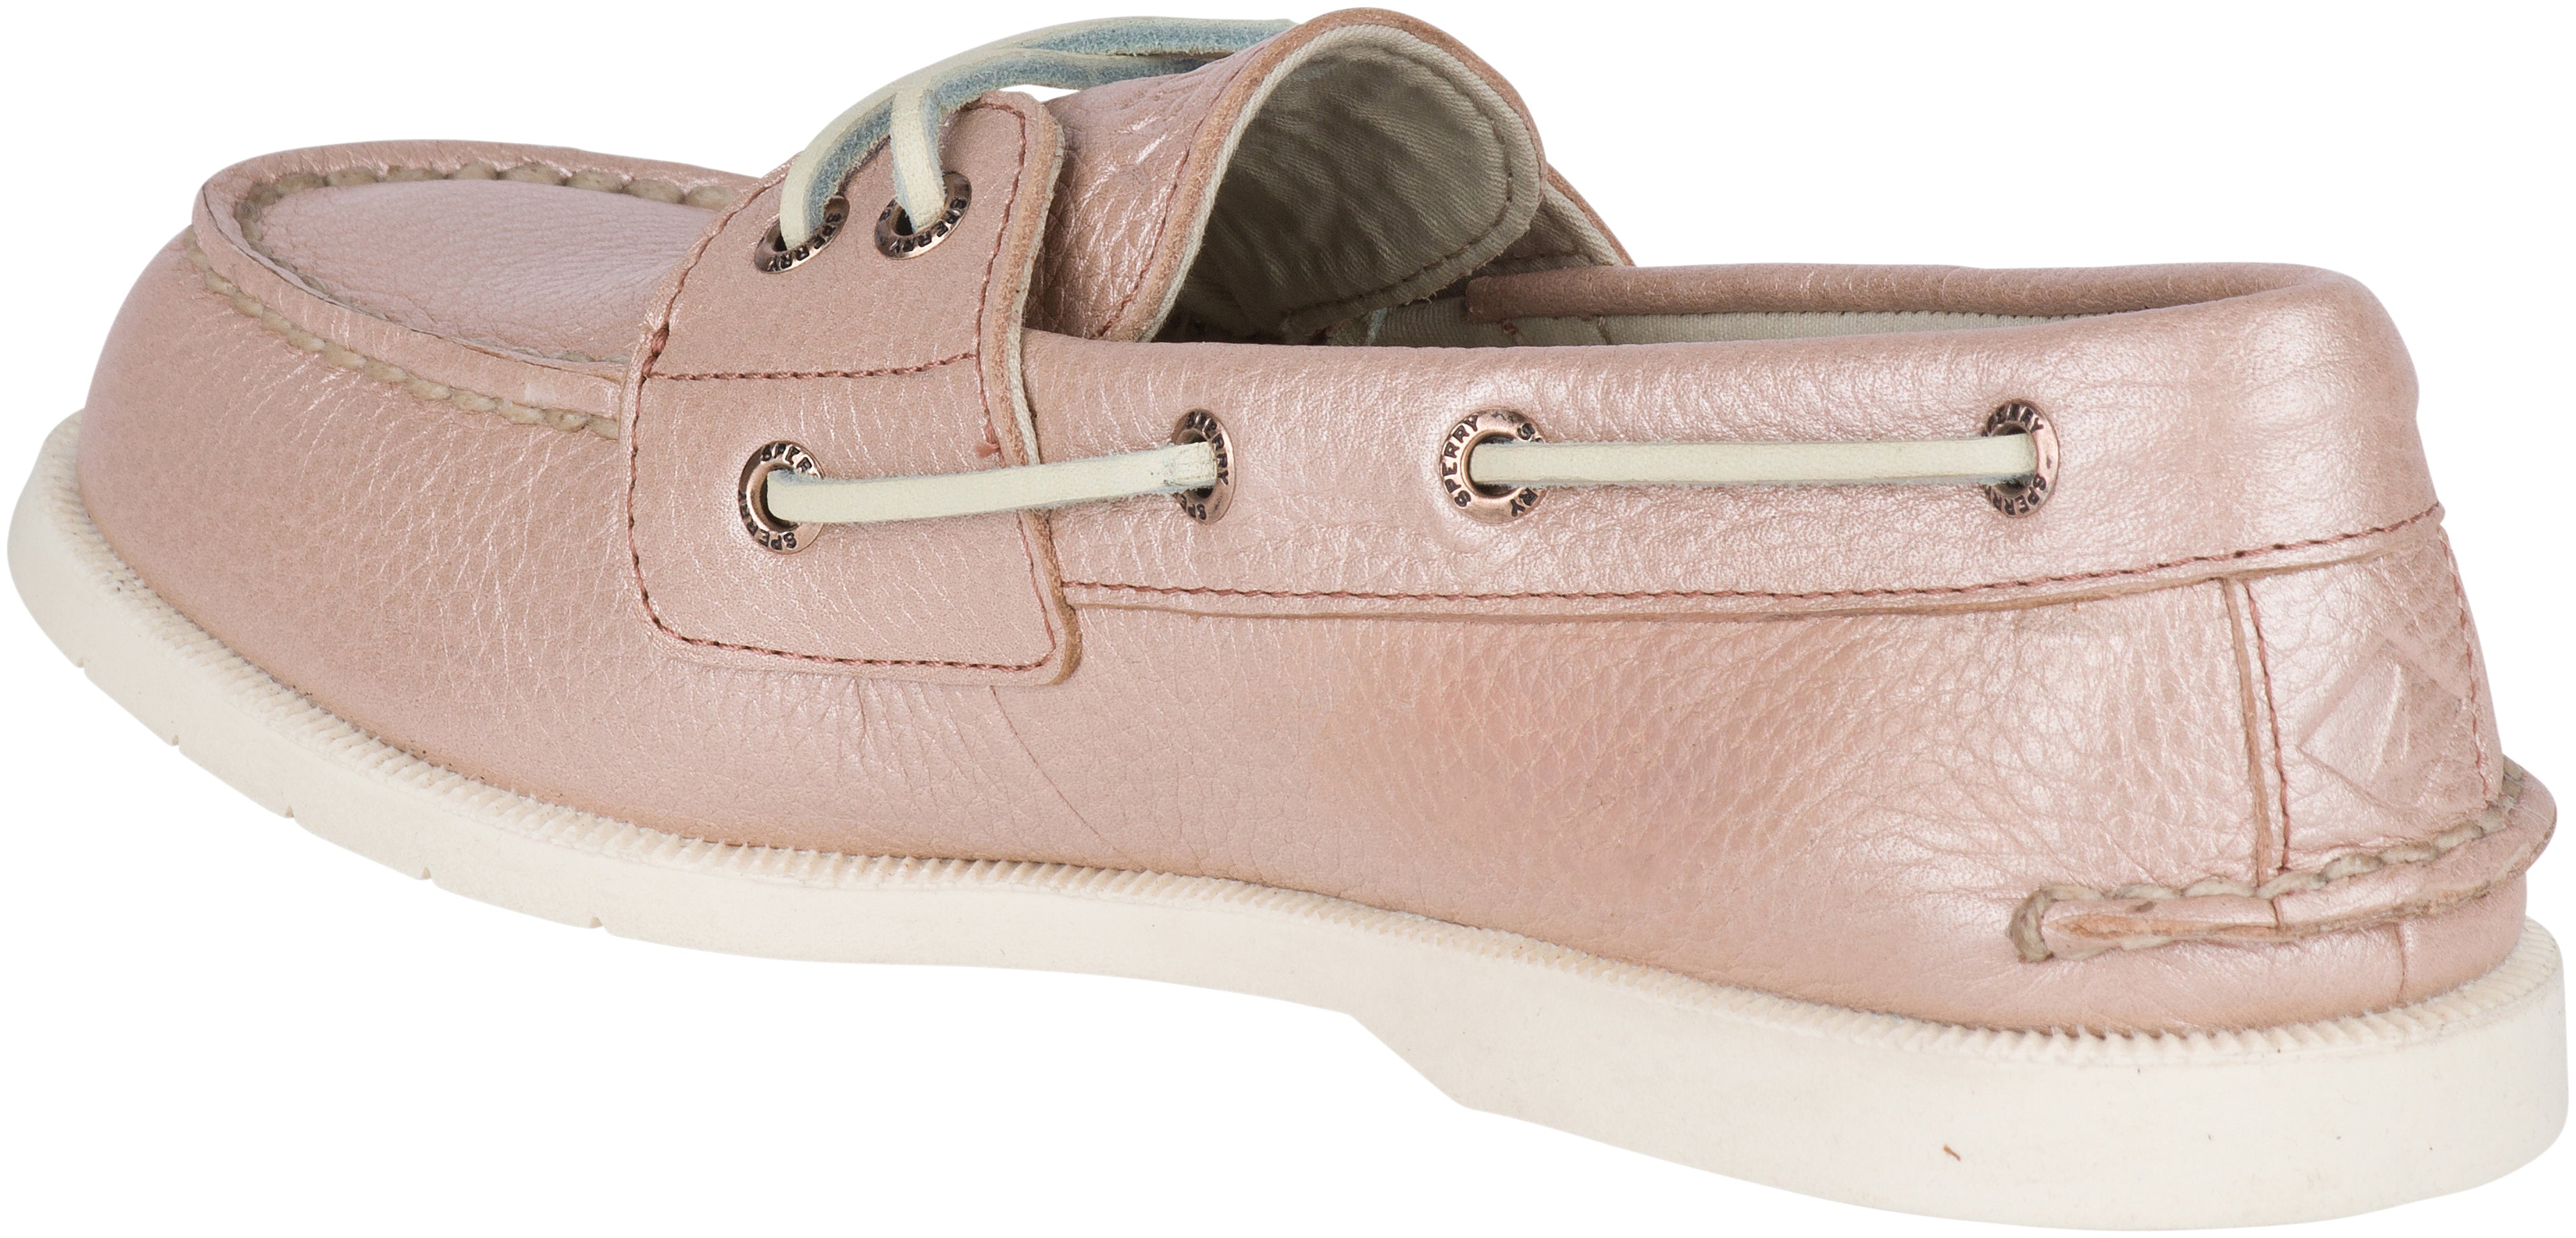 sperry conway boat shoe